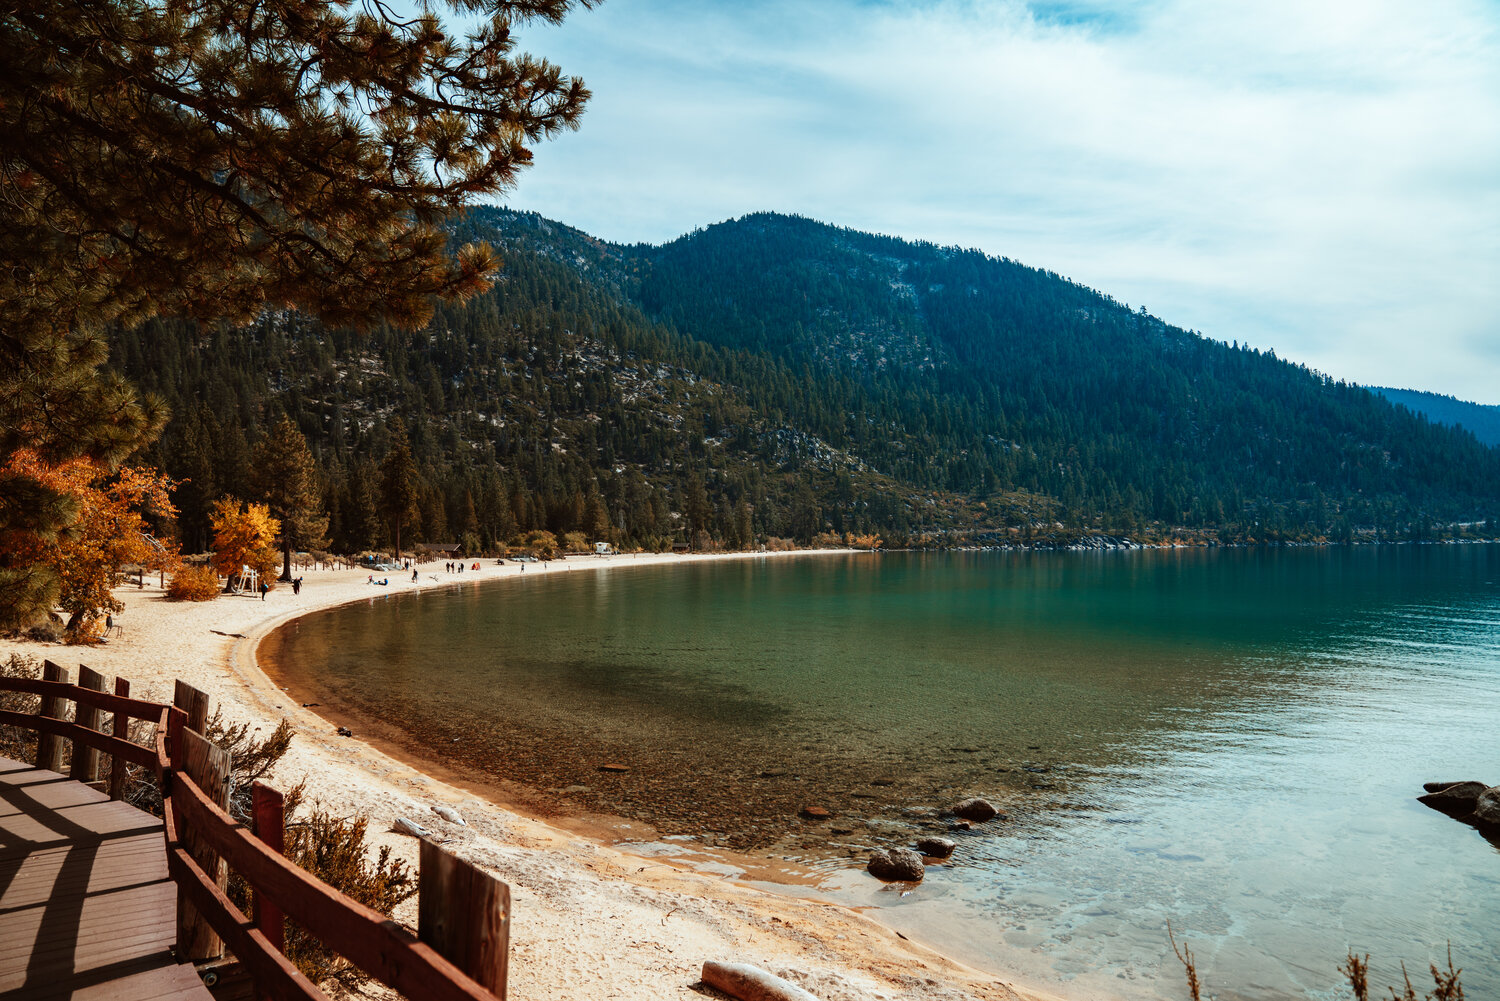 Tahoe is famous for late snowstorms in May and even June, but did you know we also get to enjoy a late summer? Weather in September is often still warm enough to enjoy a lakeside day. As an added bonus: this is the best time to take a plunge into the famously clear Tahoe water, as it will be at it’s warmest temperature of the year. The evenings cool down quickly, making a cozy blanket to wrap up in essential for late-night stargazing.